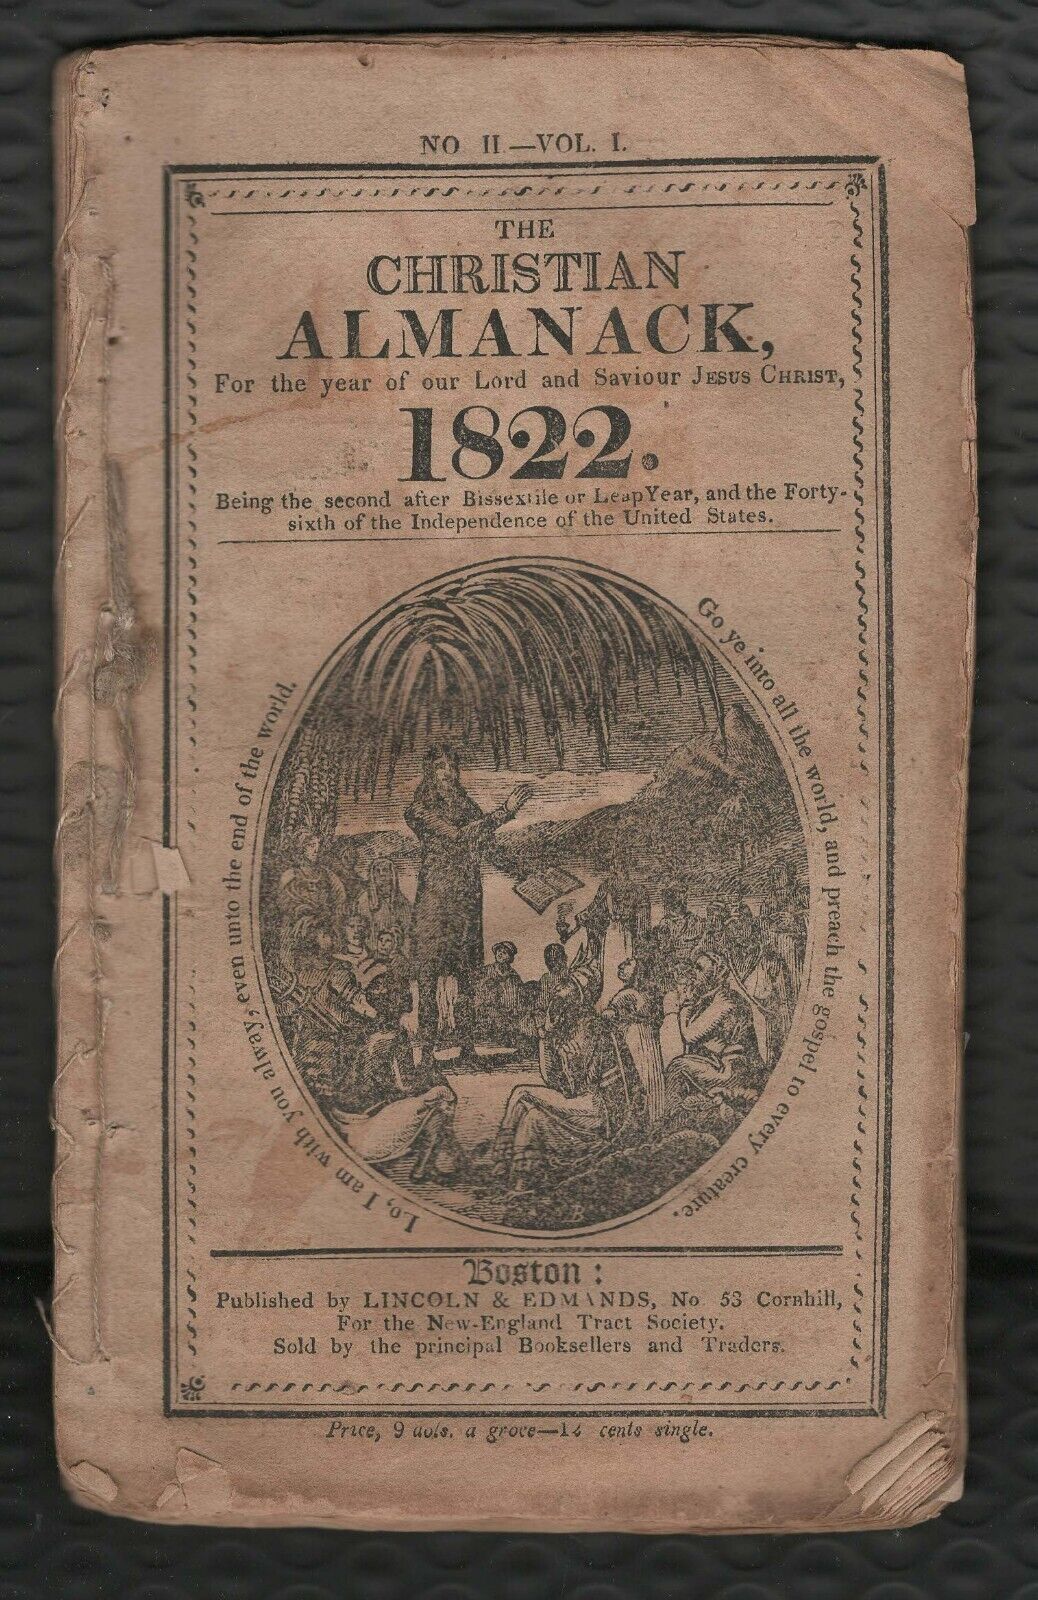 1822 The Christian Almanac, Lincoln & Edmands for the New-England Tract Society